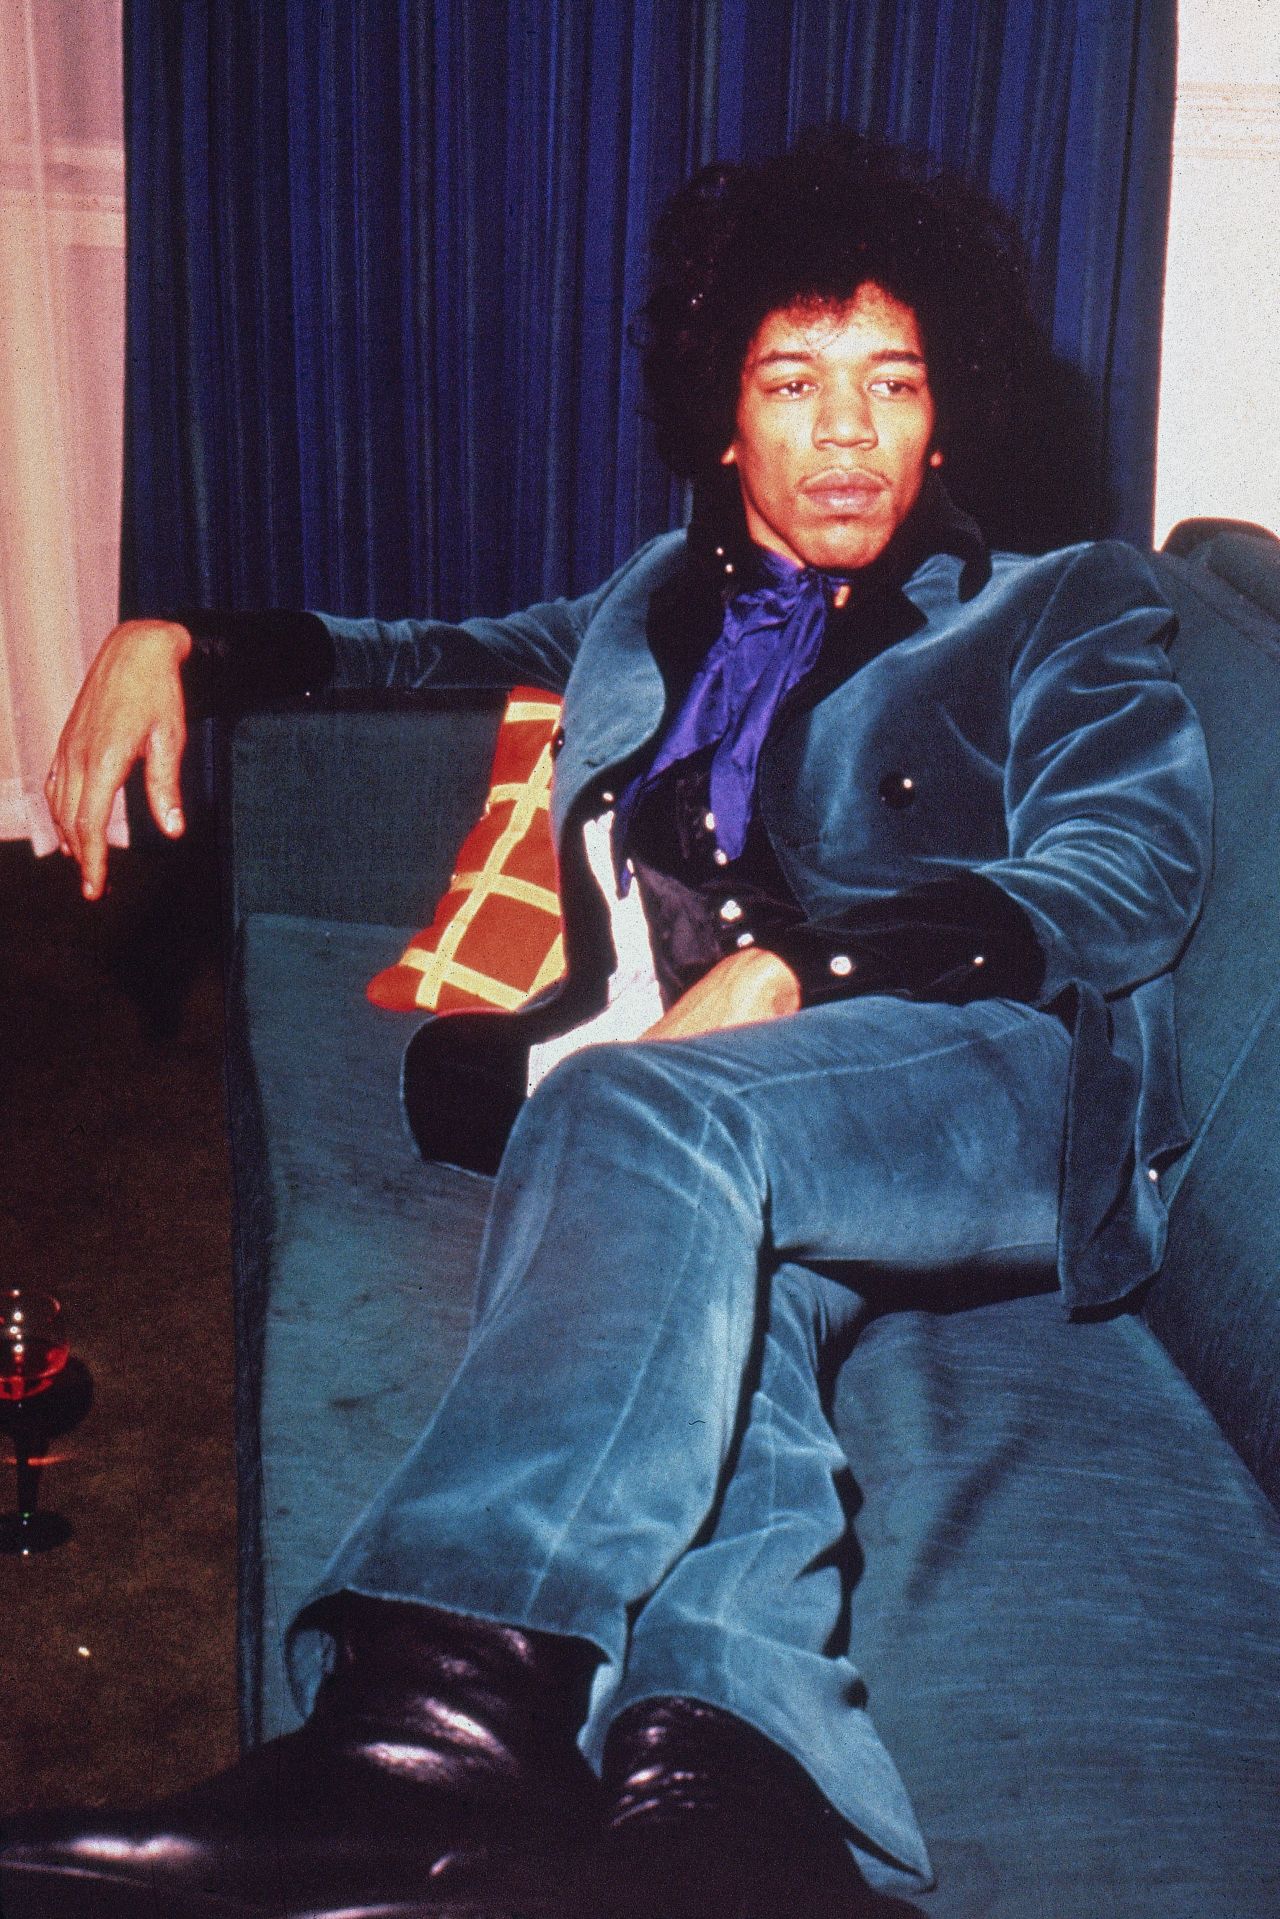 Born in Seattle in 1942, Hendrix taught himself to play guitar as a teenager and played in high school bands before enlisting in the Army, according to <a href="http://www.rollingstone.com/music/artists/jimi-hendrix/biography" target="_blank" target="_blank">Rolling Stone</a>. By  the early '60s, Hendrix had been discharged and was playing backup for acts including Sam Cooke, B.B. King, Little Richard and the Isley Brothers.